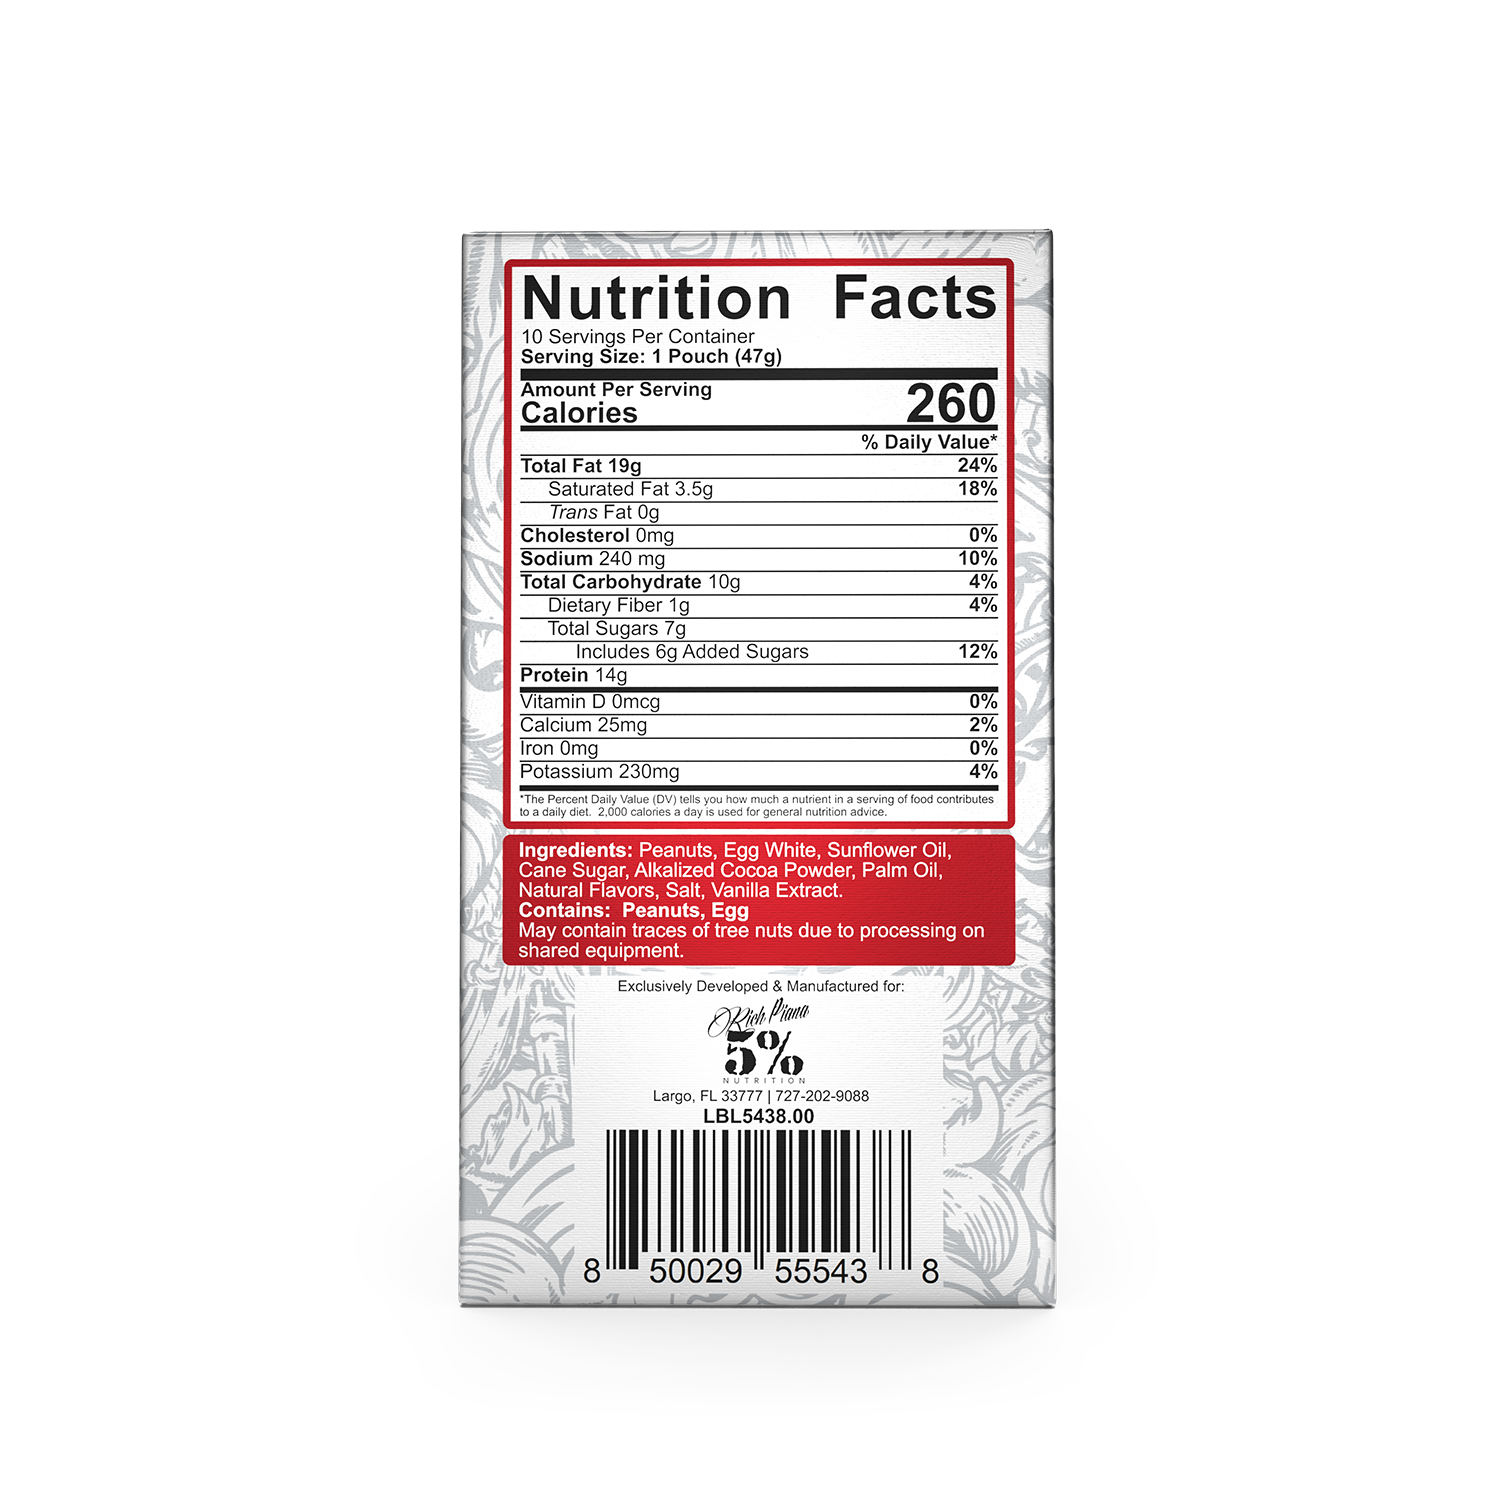 Snack Time Protein Box (10 Pouches) - 5% Nutrition